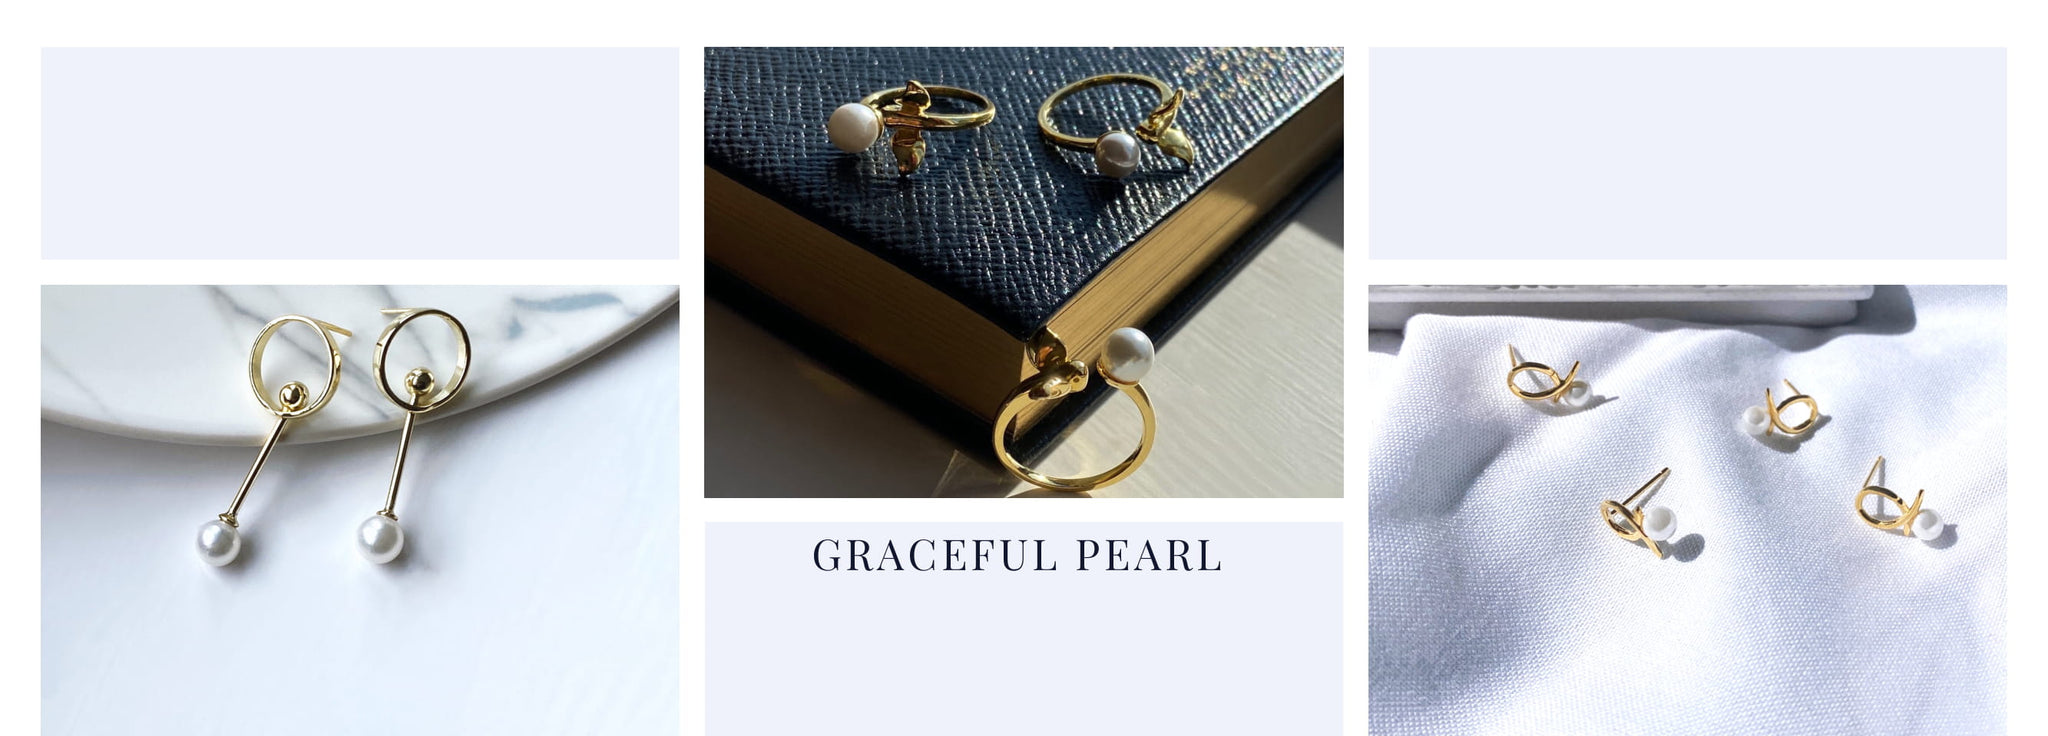 The Graceful Pearl Collection by Bella Mayford